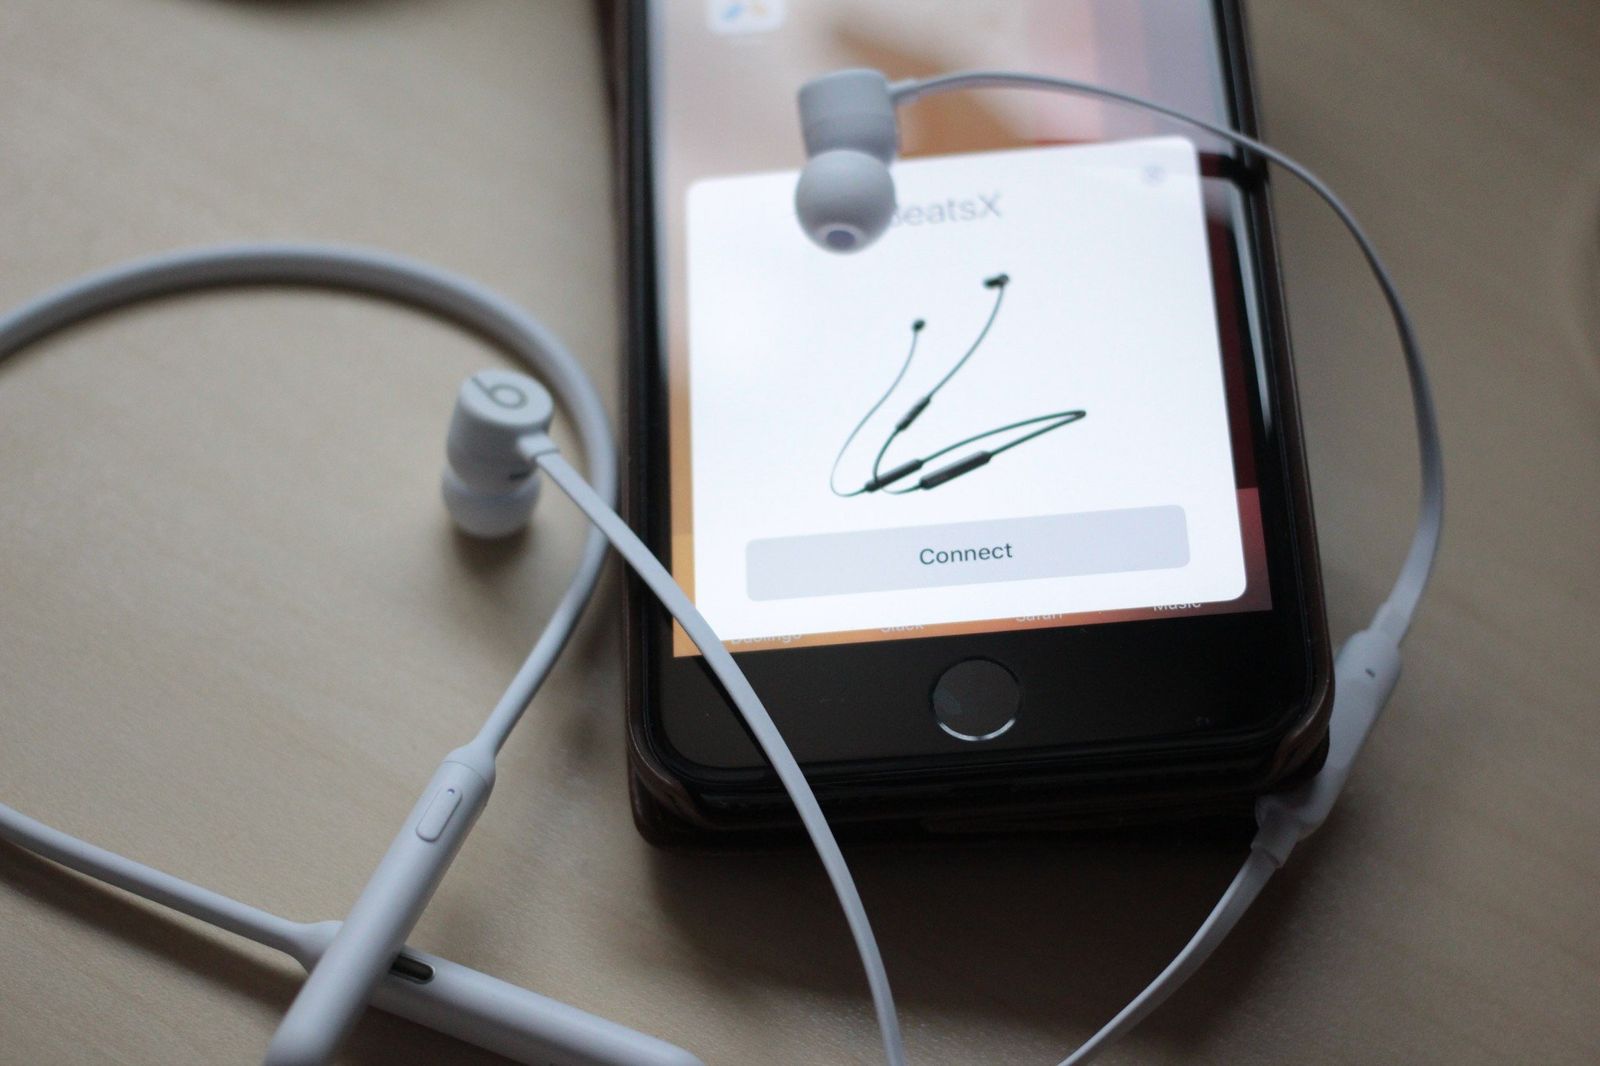 BeatsX battery life and charge time 